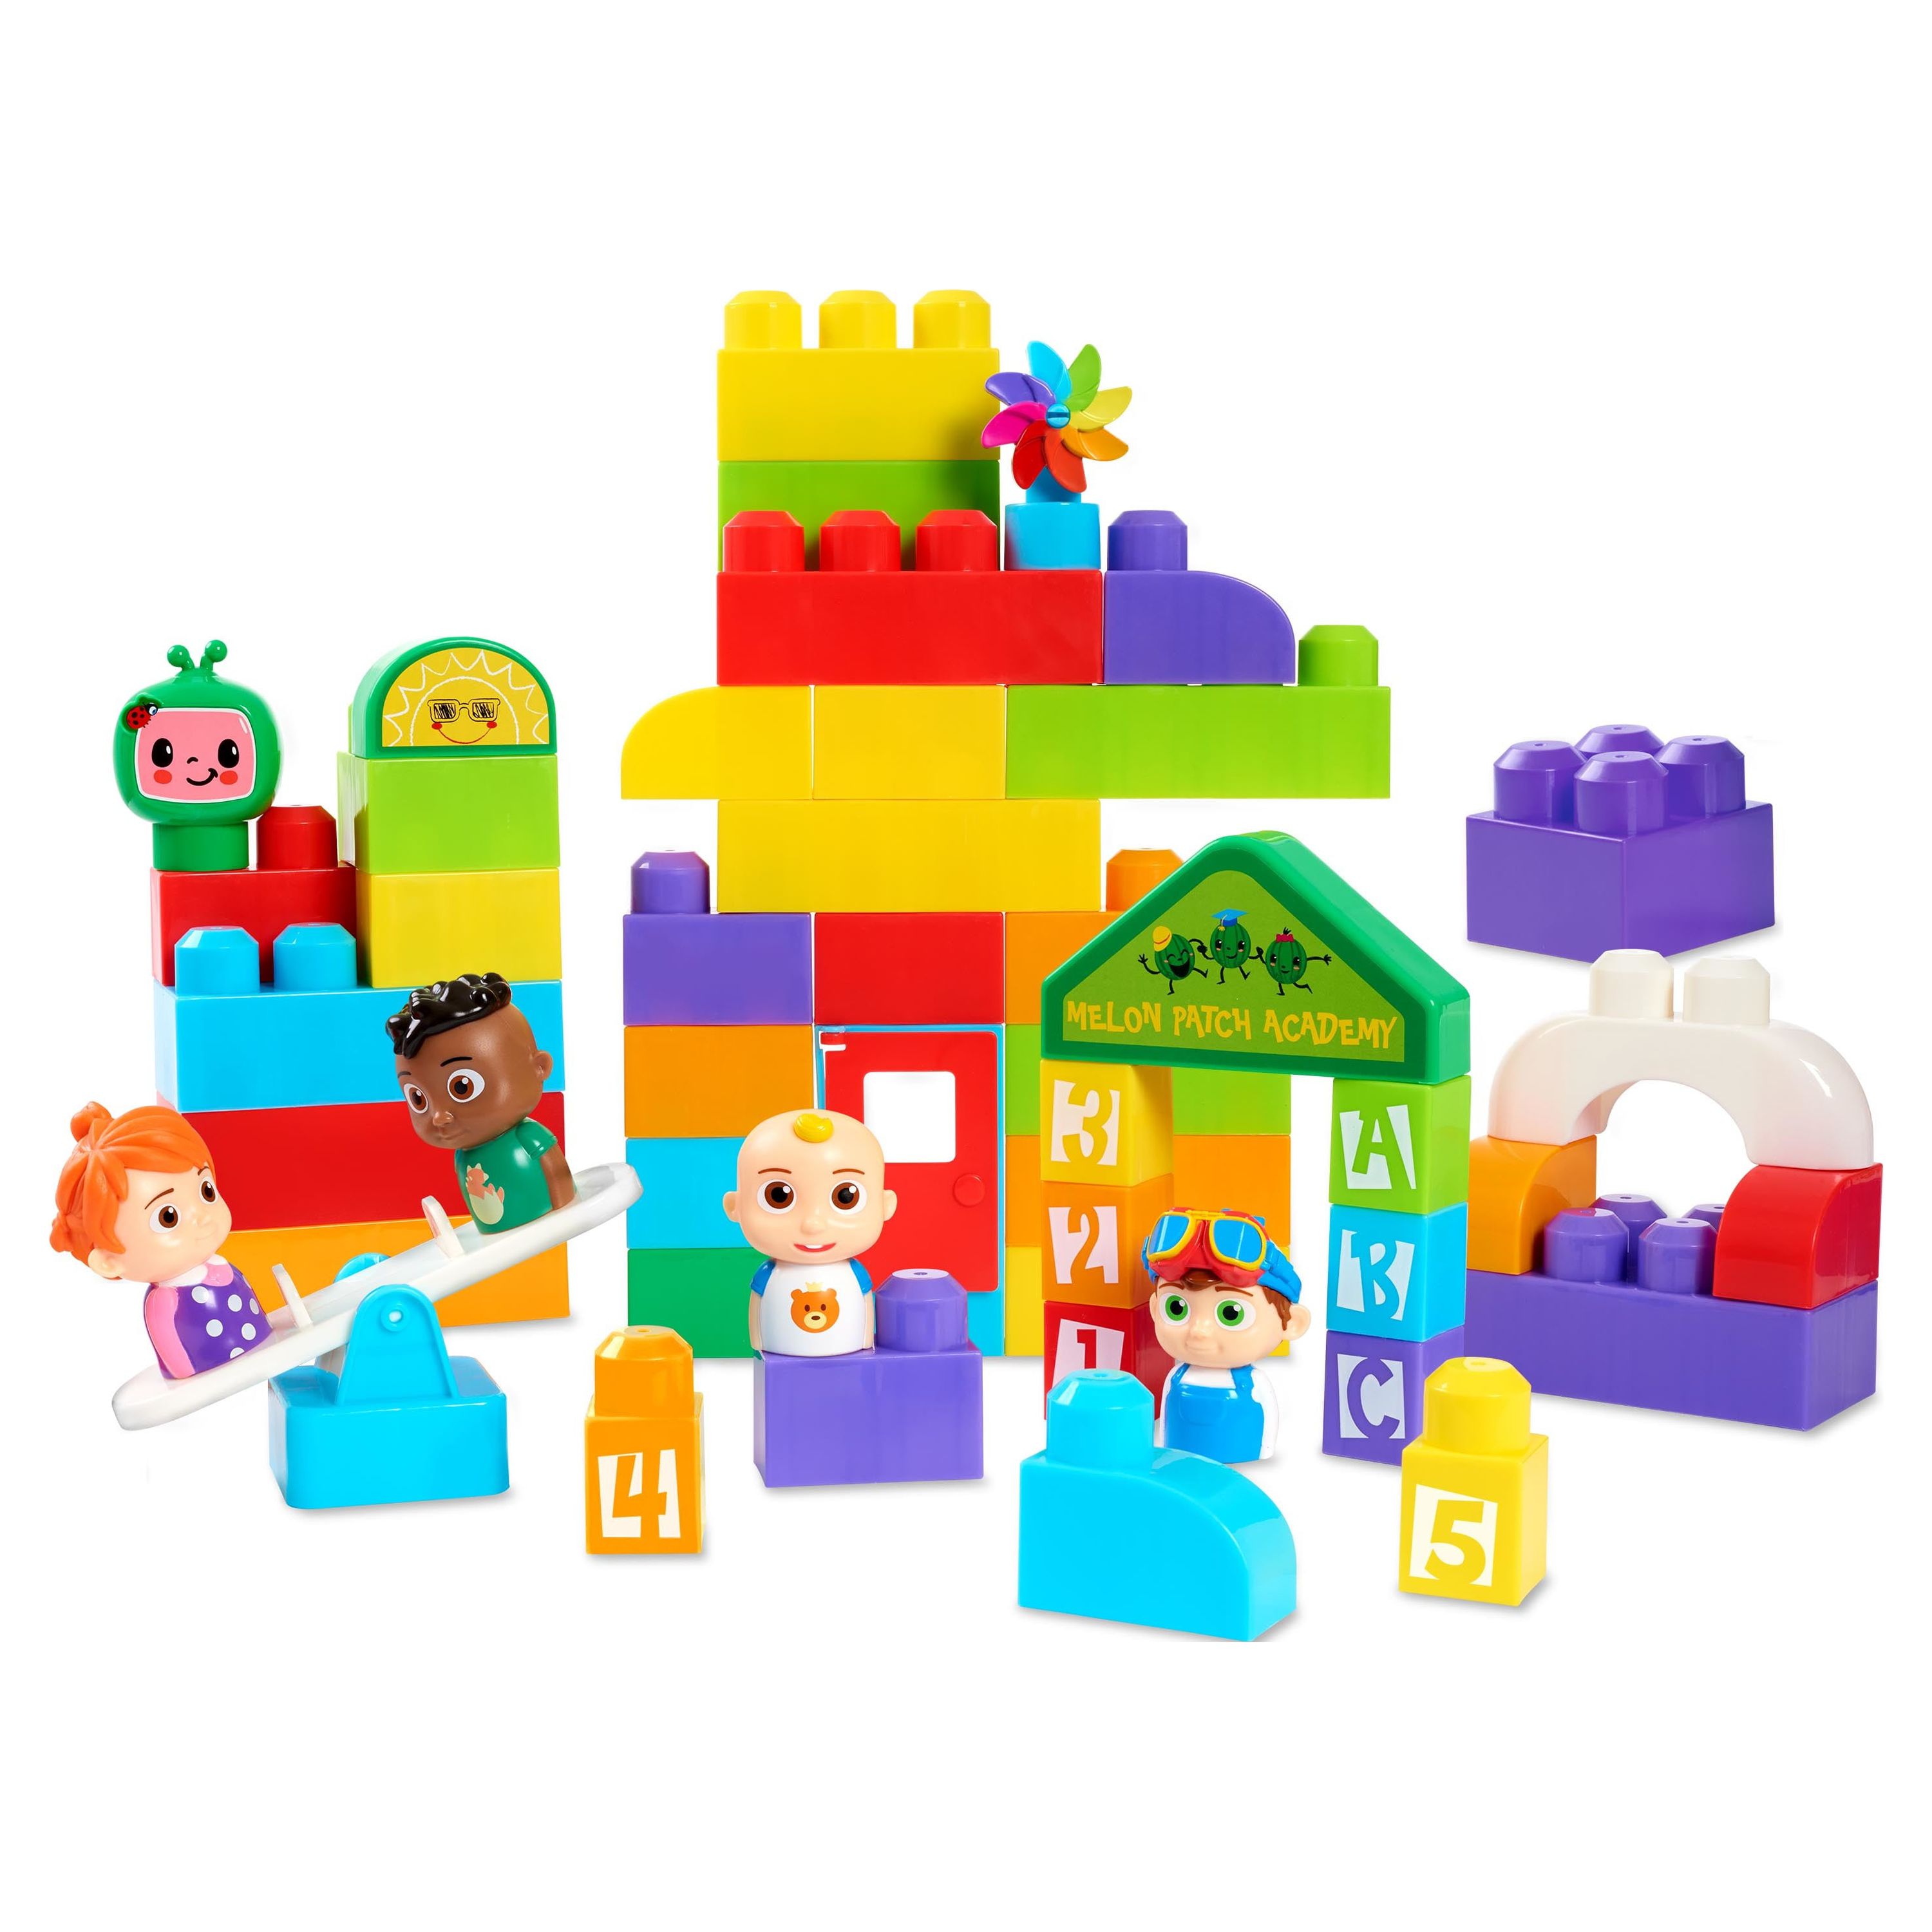 Cocomelon Deluxe Construction Set, Officially Licensed Kids Toys for Ages 18 Month, Gifts and Presents - image 3 of 6